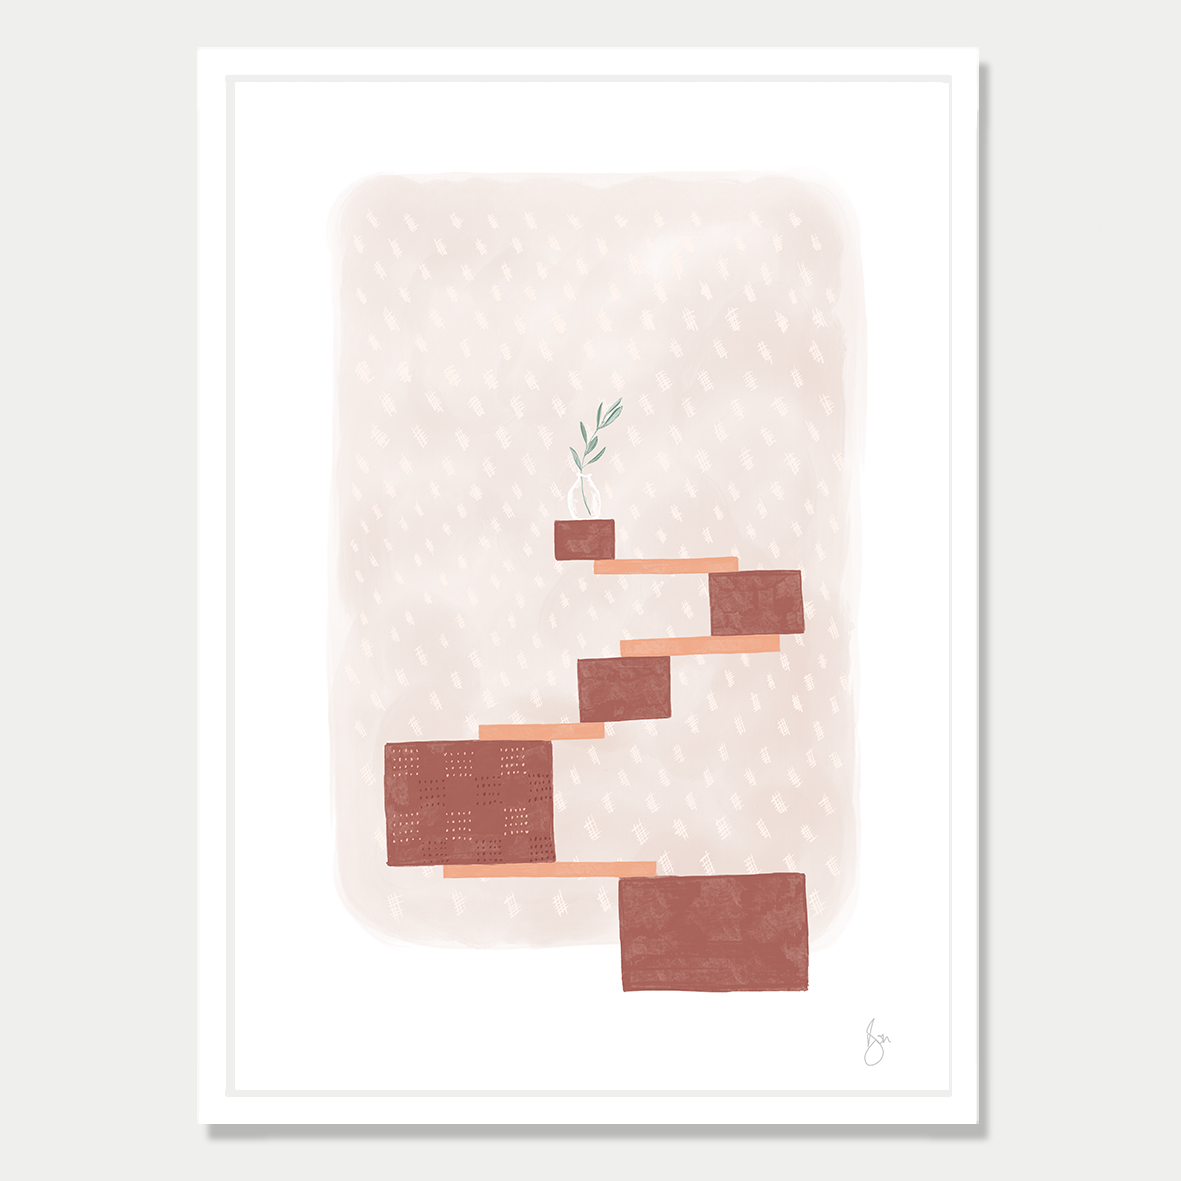 Art print of several blocks balancing with a olive branch in a vase sitting on top, in soft autumn colour palette by Bon Jung. Printed in New Zealand by endemicworld and framed in white.